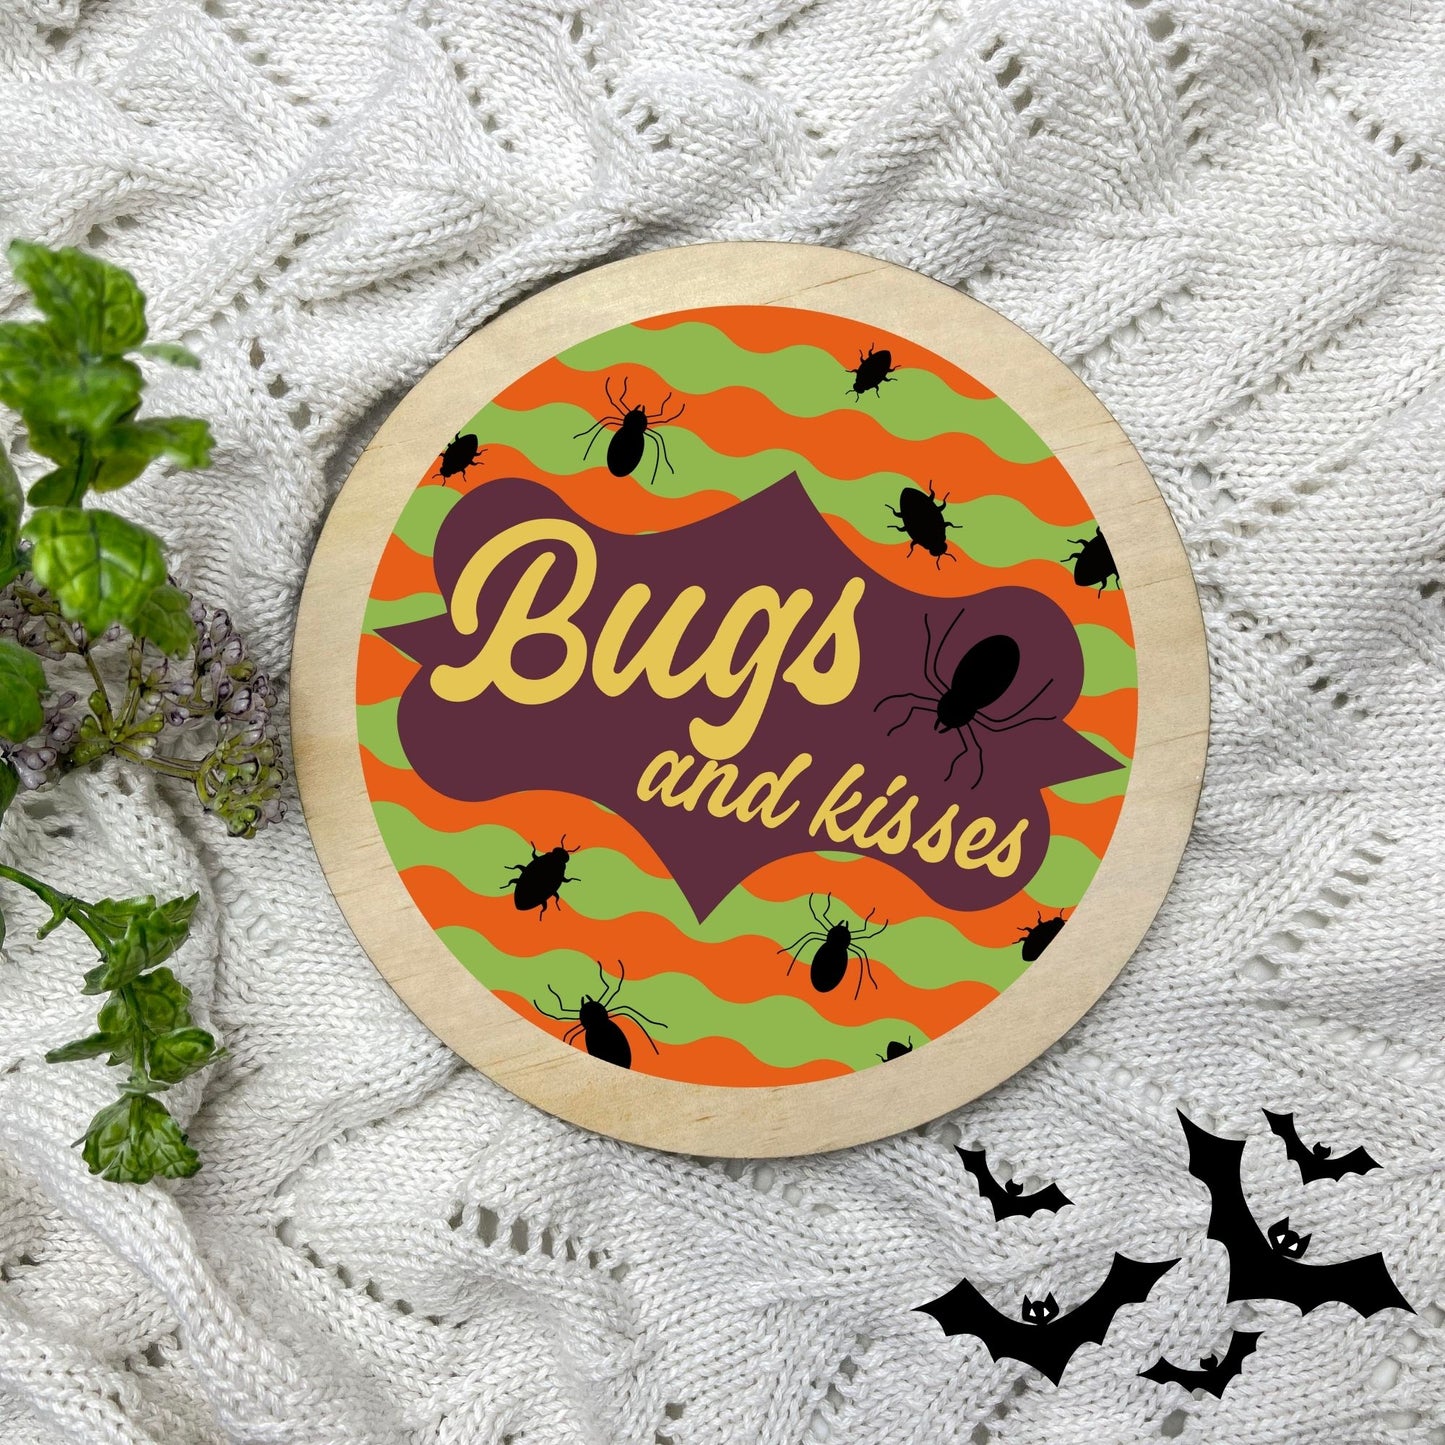 Bugs and kisses sign, Halloween Decor, Spooky Vibes, hocus pocus sign, trick or treat decor, haunted house h42